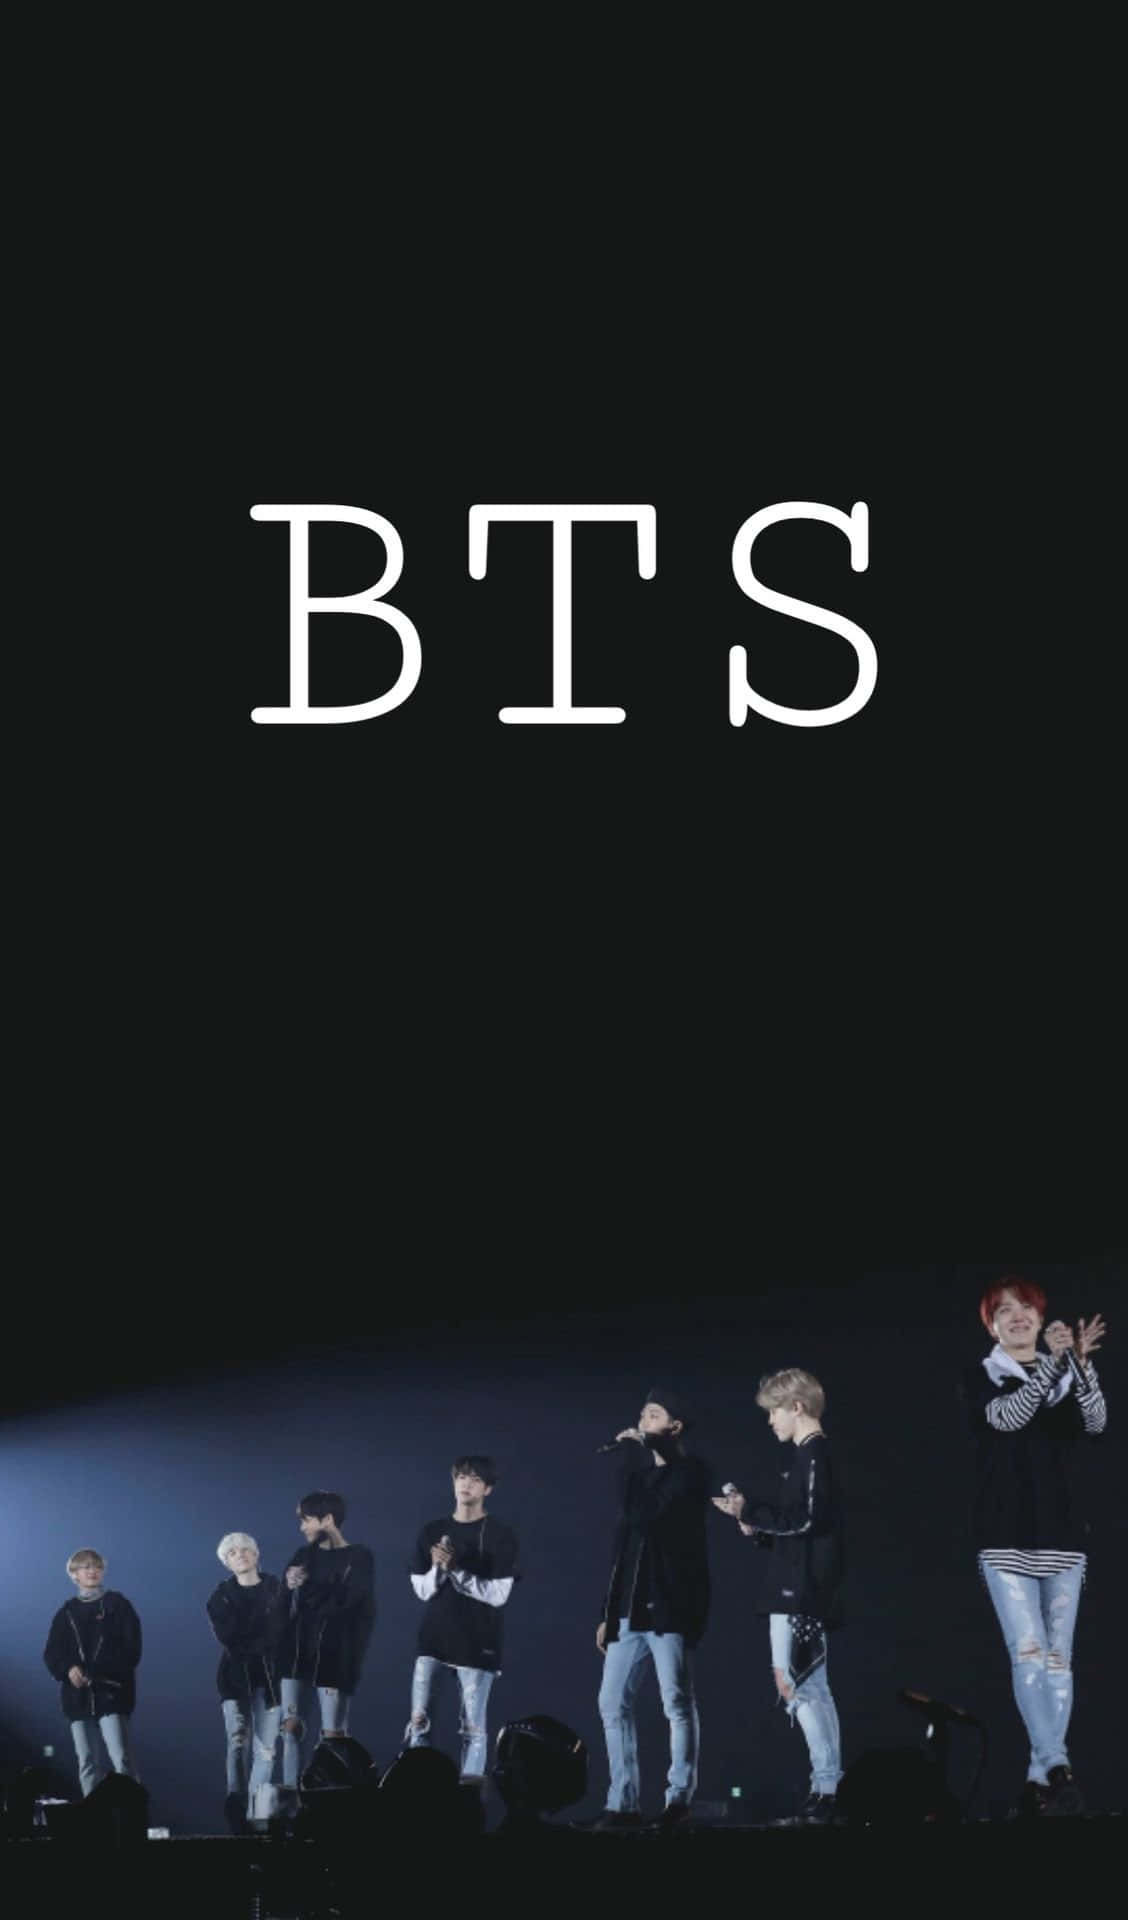 BTS performing on stage in front of their fans Wallpaper